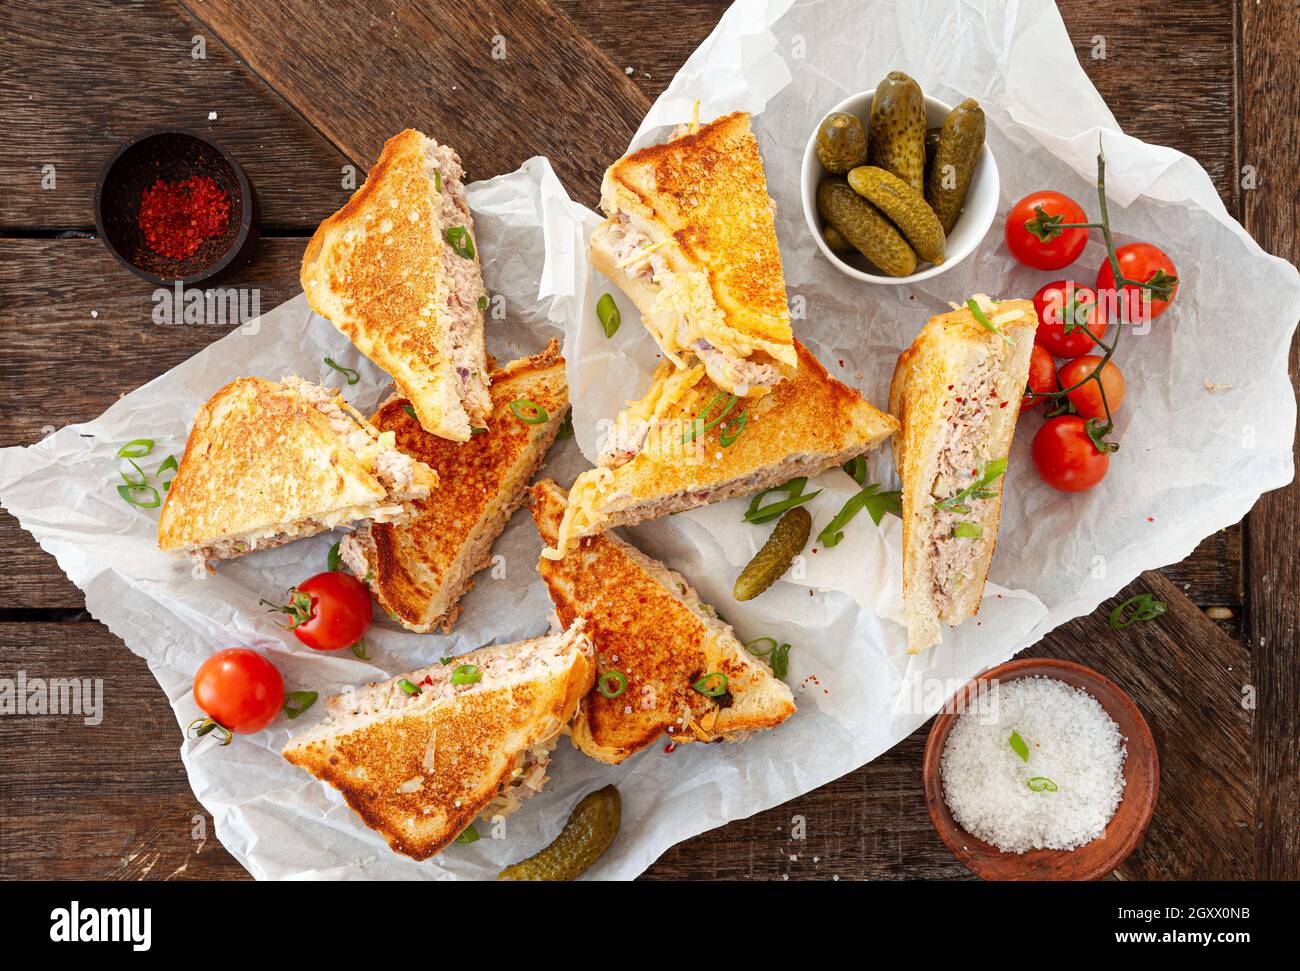 Grilled sandwich with tuna and melted cheese Stock Photo